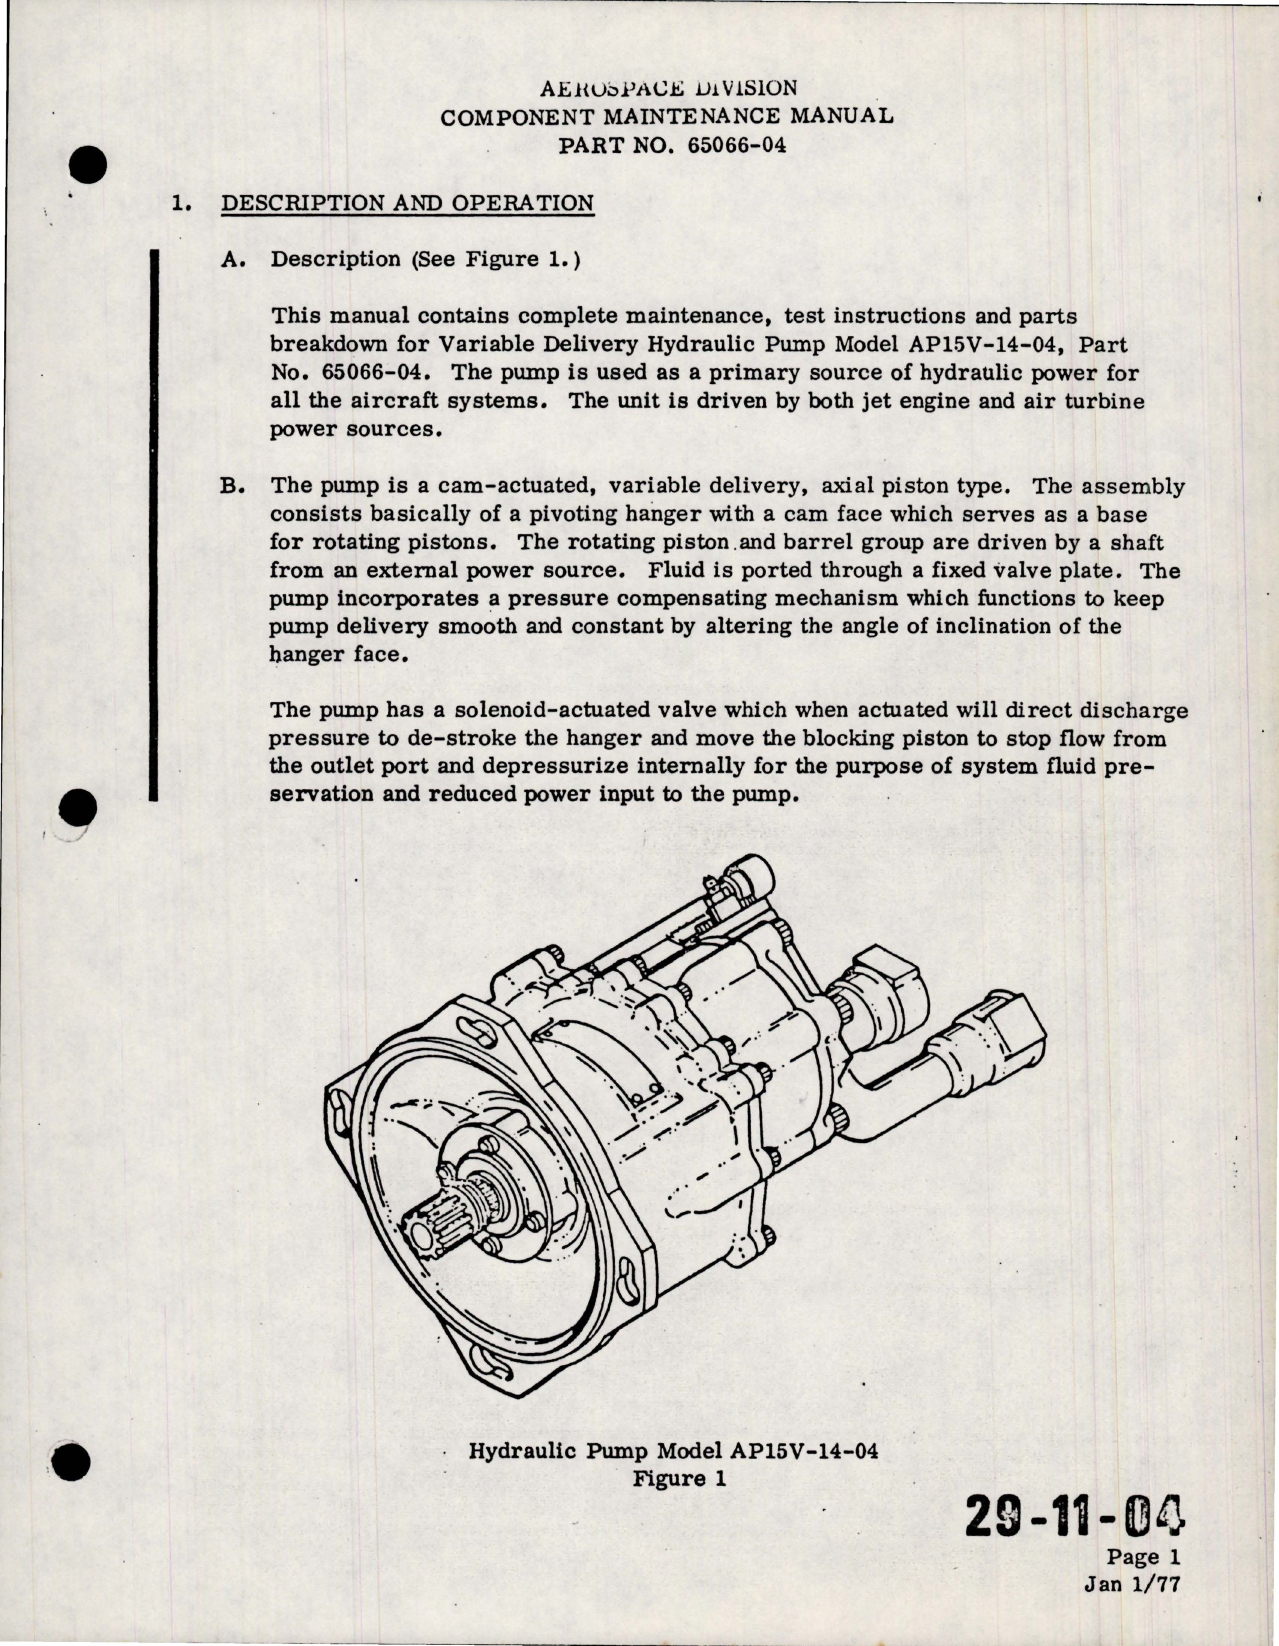 Sample page 9 from AirCorps Library document: Maintenance Manual for Hydraulic Pump - Part 65066-04 - Model AP15V-14-04 